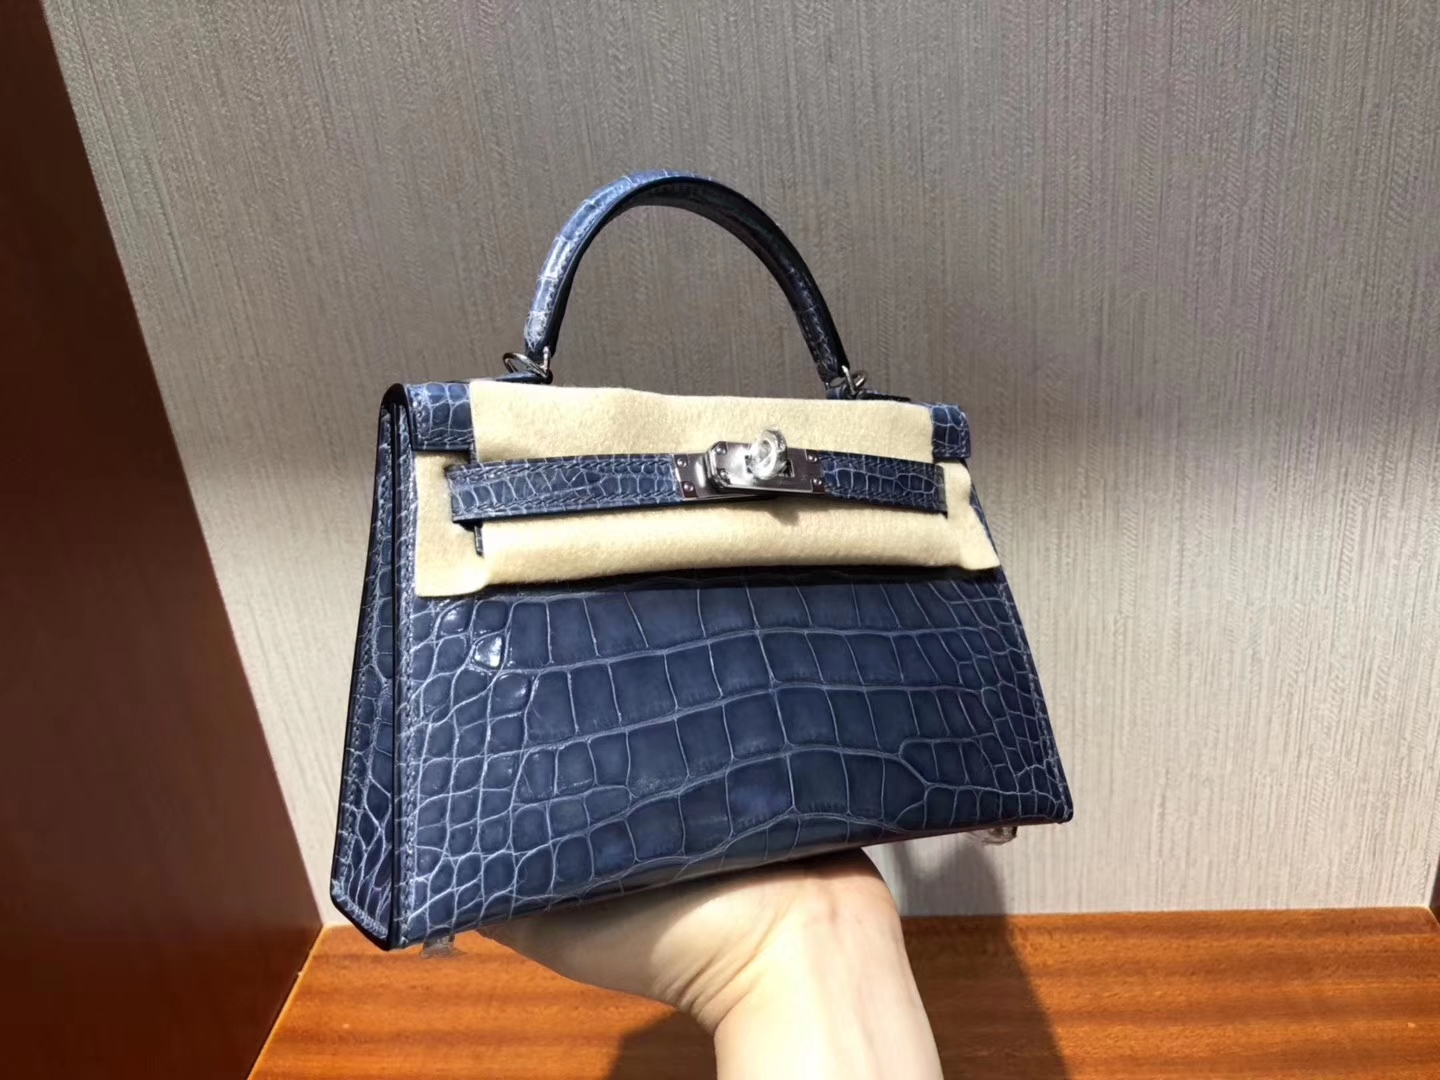 Stock Hermes N7 Blue Tempete Shiny Crocodile Minikelly-2 Evening Clutch Bag Silver Hardware